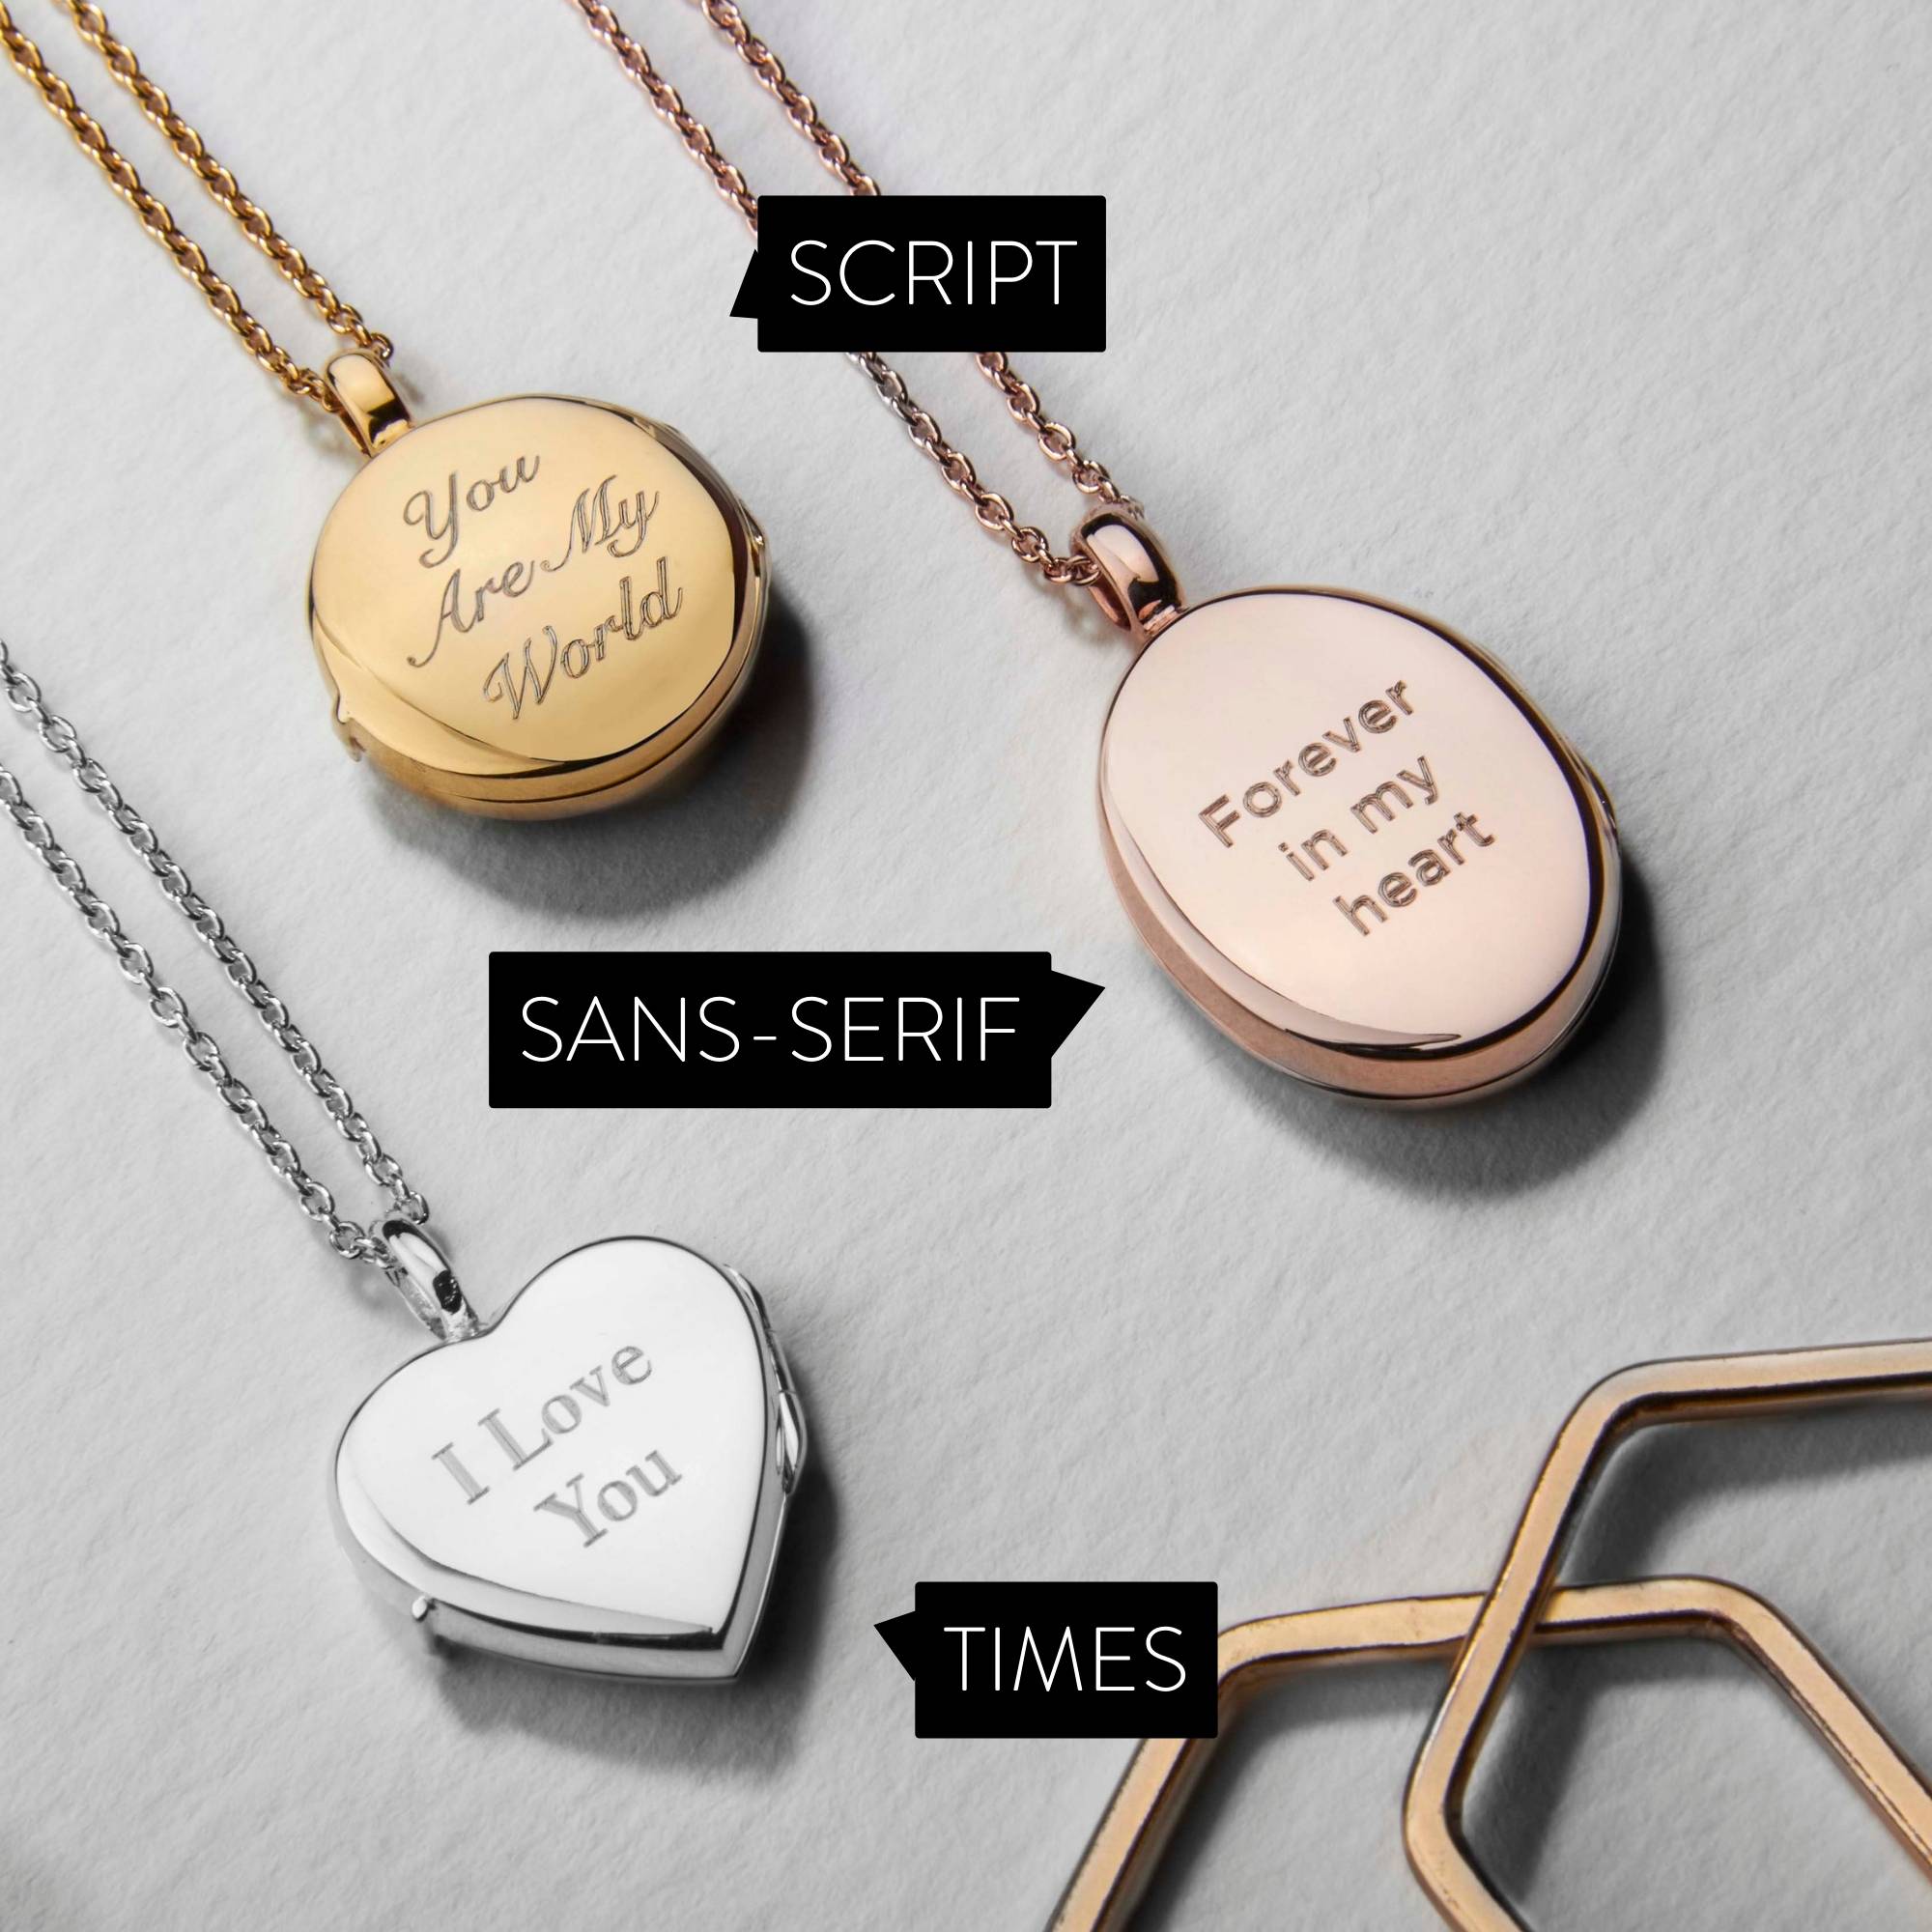 Personalised Pendant Necklace With 2 Names & Heart Locket at Rs 999.00 |  पेंडेंट हार, पेंडेंट नेकलेस - Parrita Global, Mumbai | ID: 27192580991